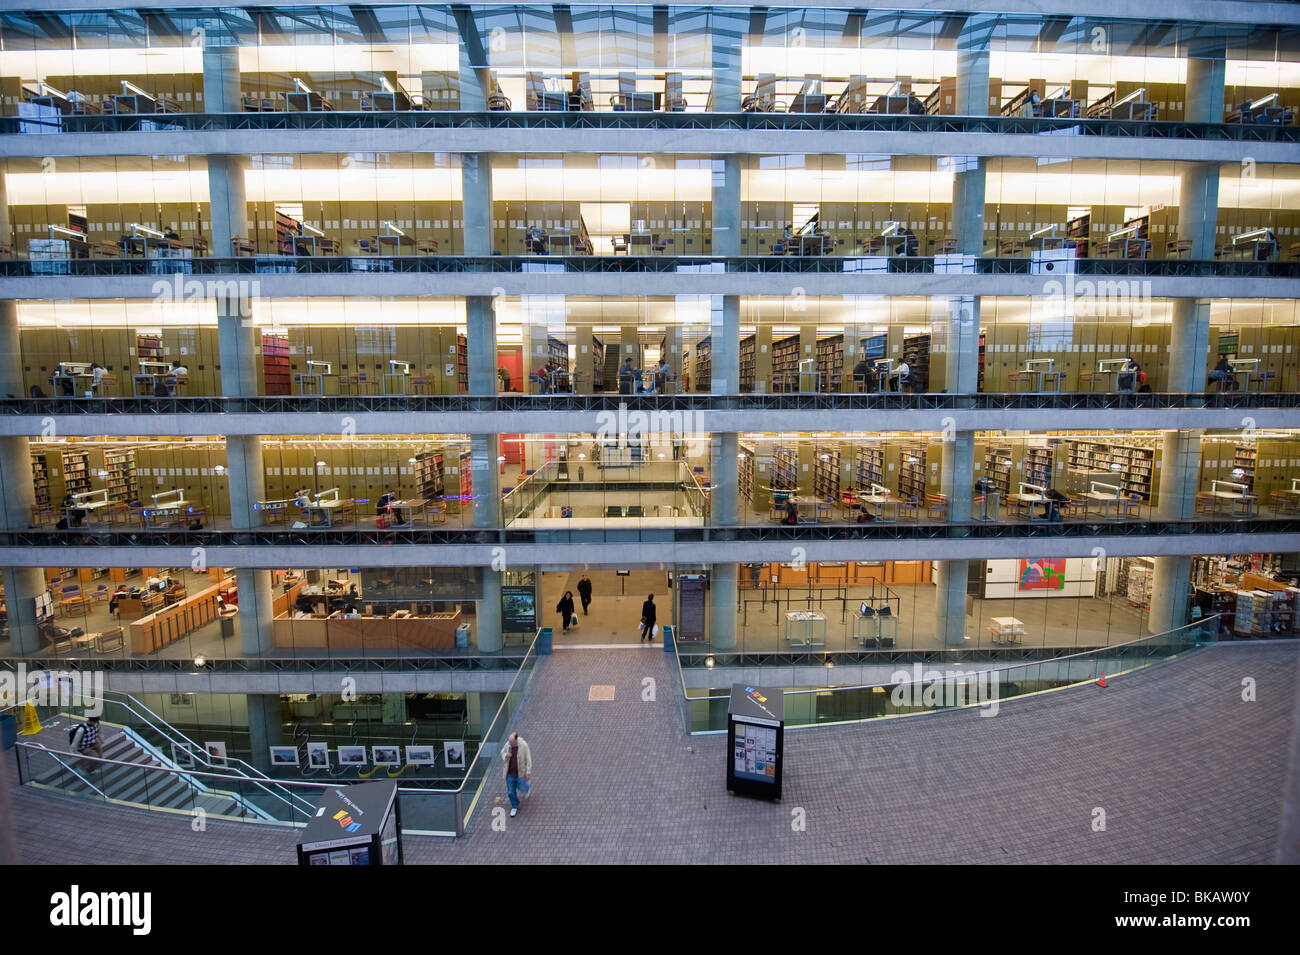 inside Vancouver Public Library designed by Moshe Safdie, Vancouver British Columbia Canada Stock Photo